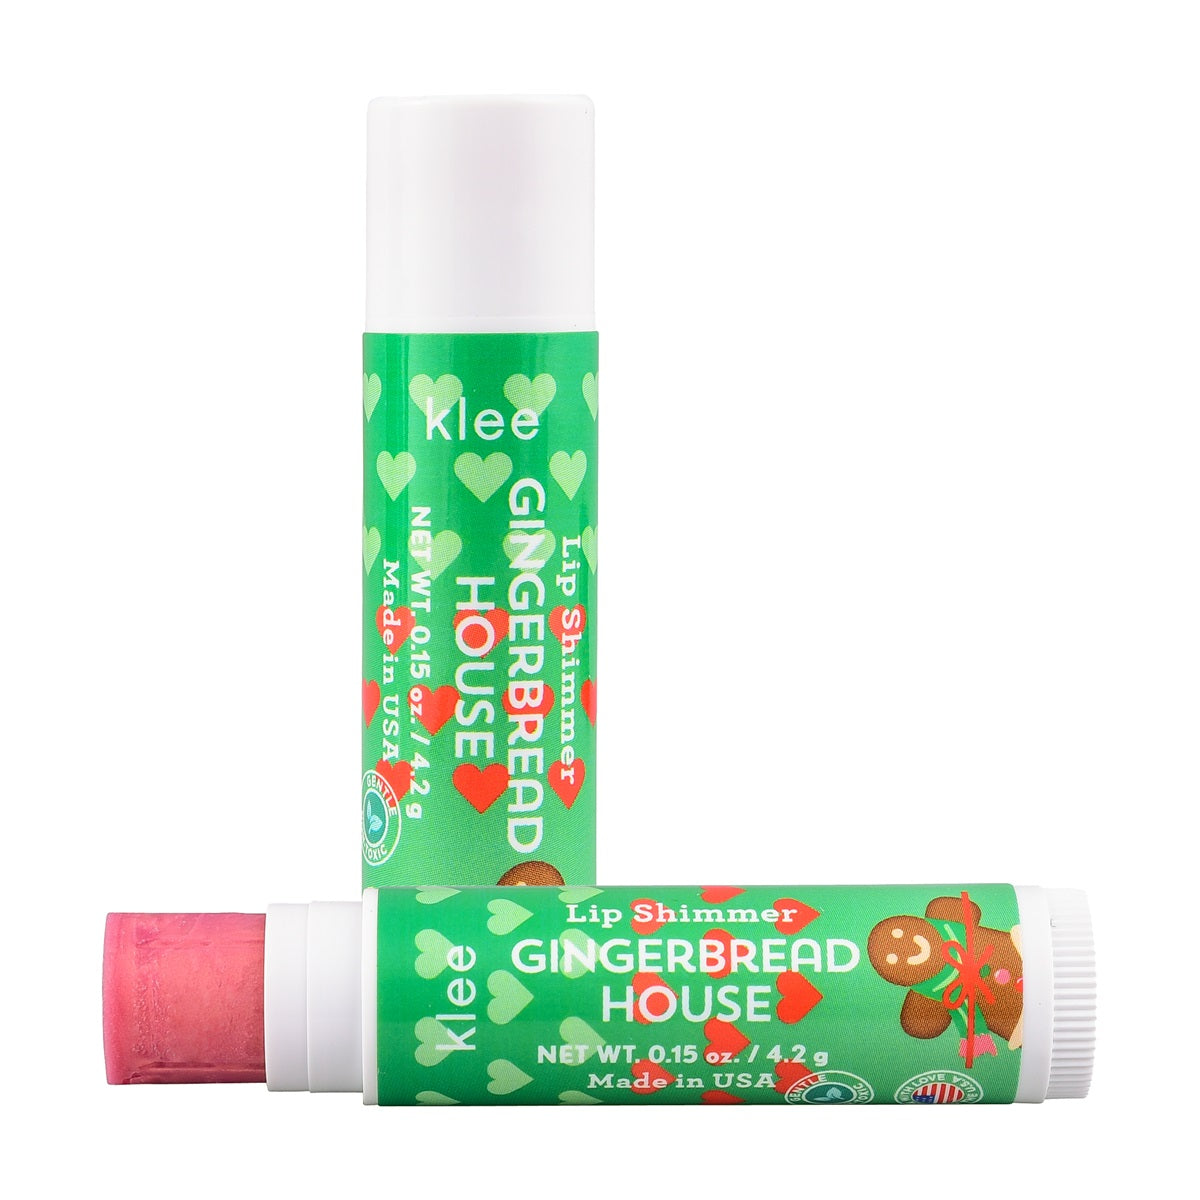 Klee Naturals - Xmas Edition - Natural Mineral Ultra Deluxe Makeup Kit 聖誕版 - 極致華麗彩妝香水組合10件組合 (Bliss Abound)